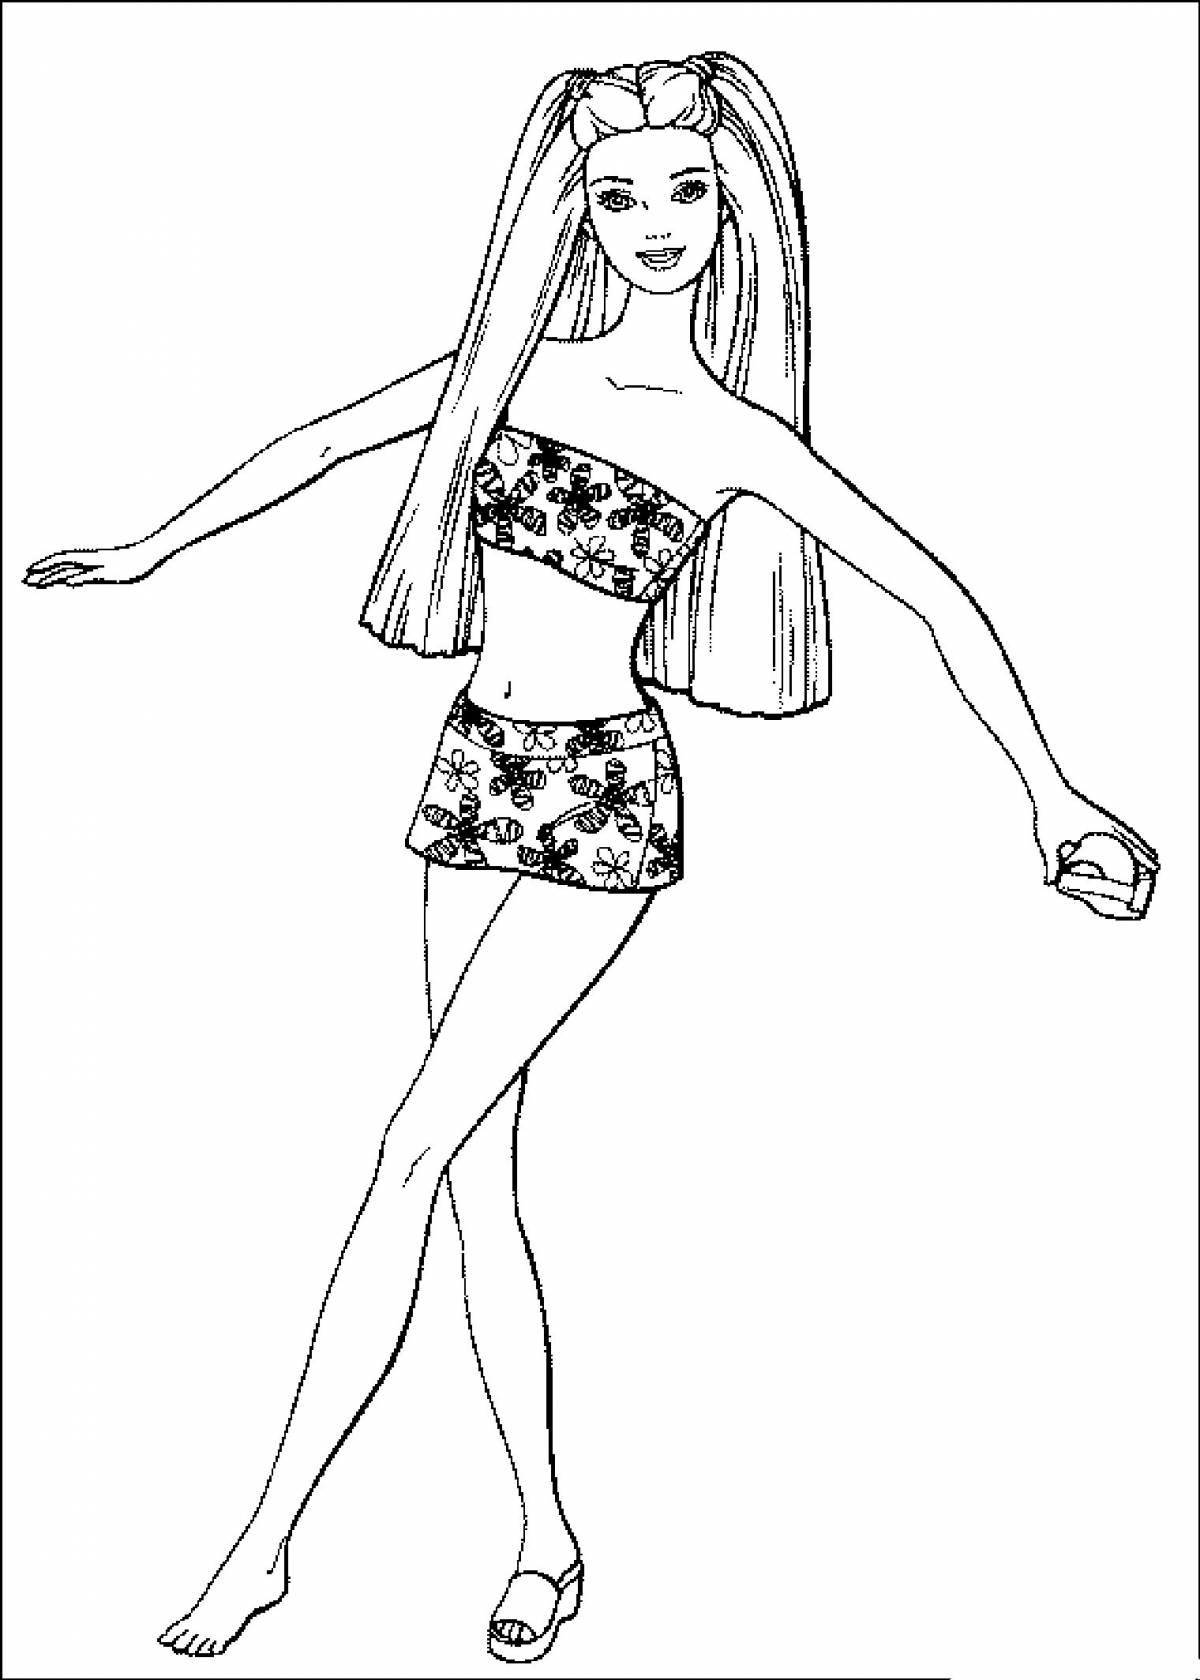 Coloring playful doll in a bathing suit